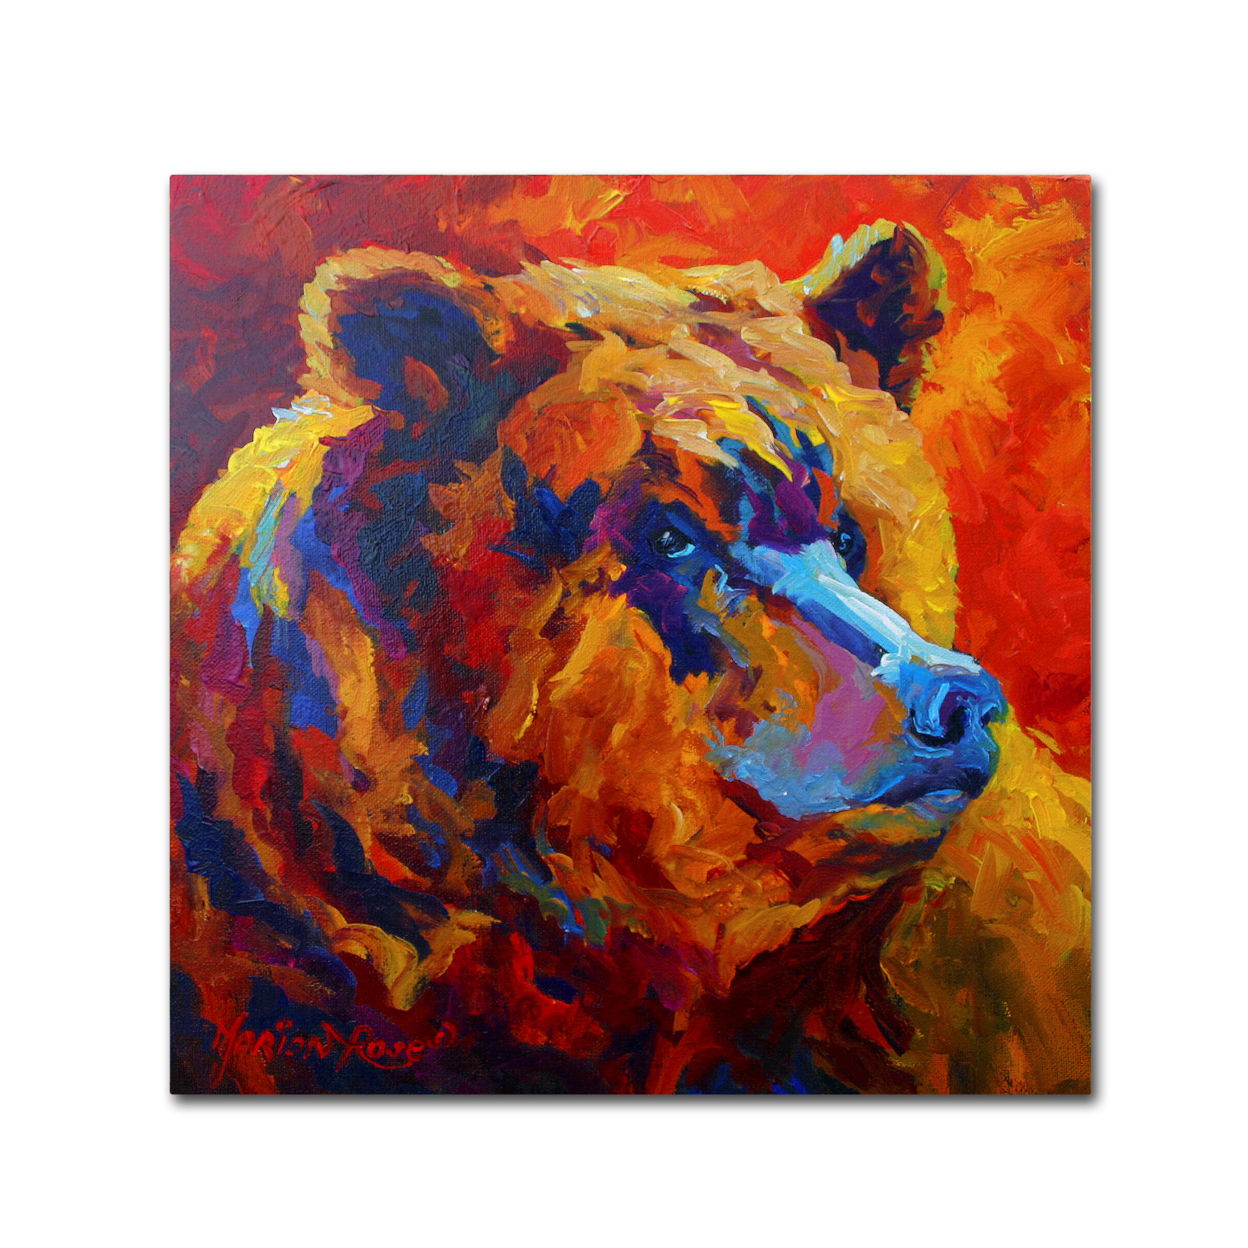 Marion Rose 'Grizz Portrait II' Ready To Hang Canvas Art 24 X 24 Inches Made In USA